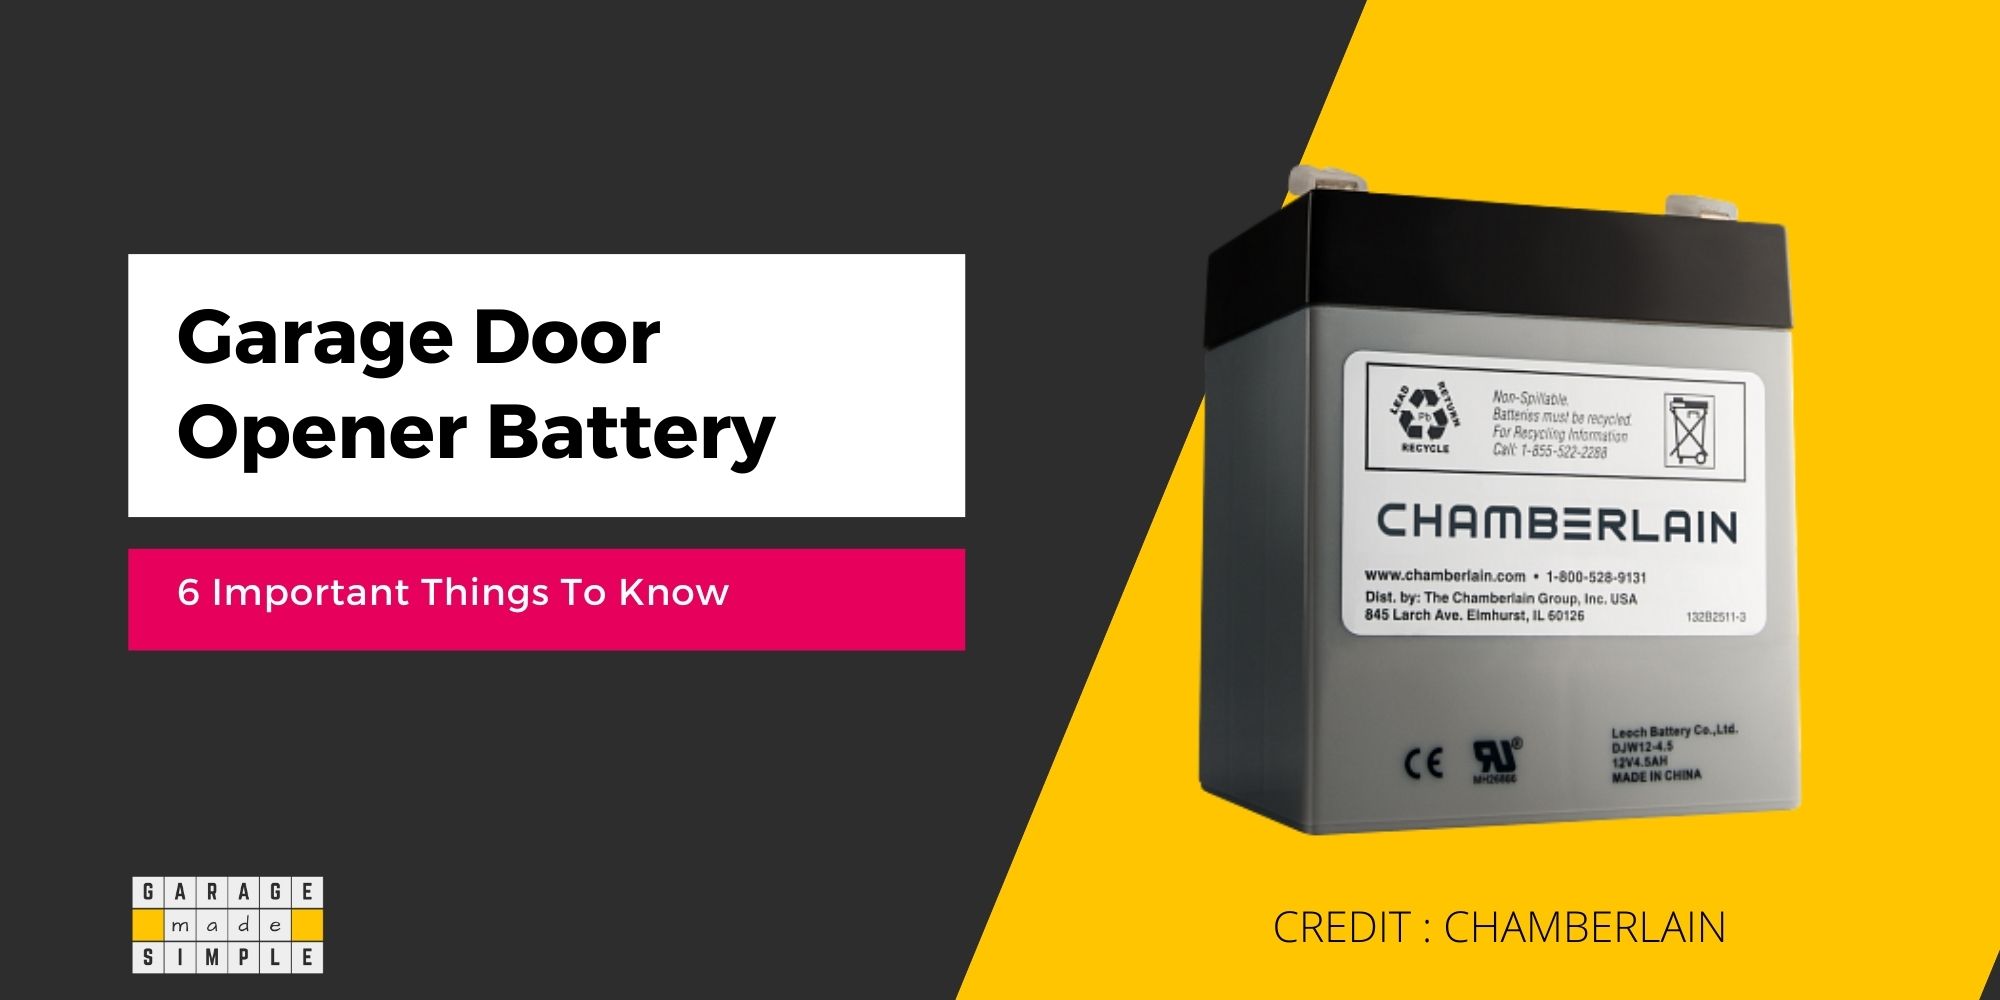 6 Important Things You Need To Know About Garage Door Opener Battery